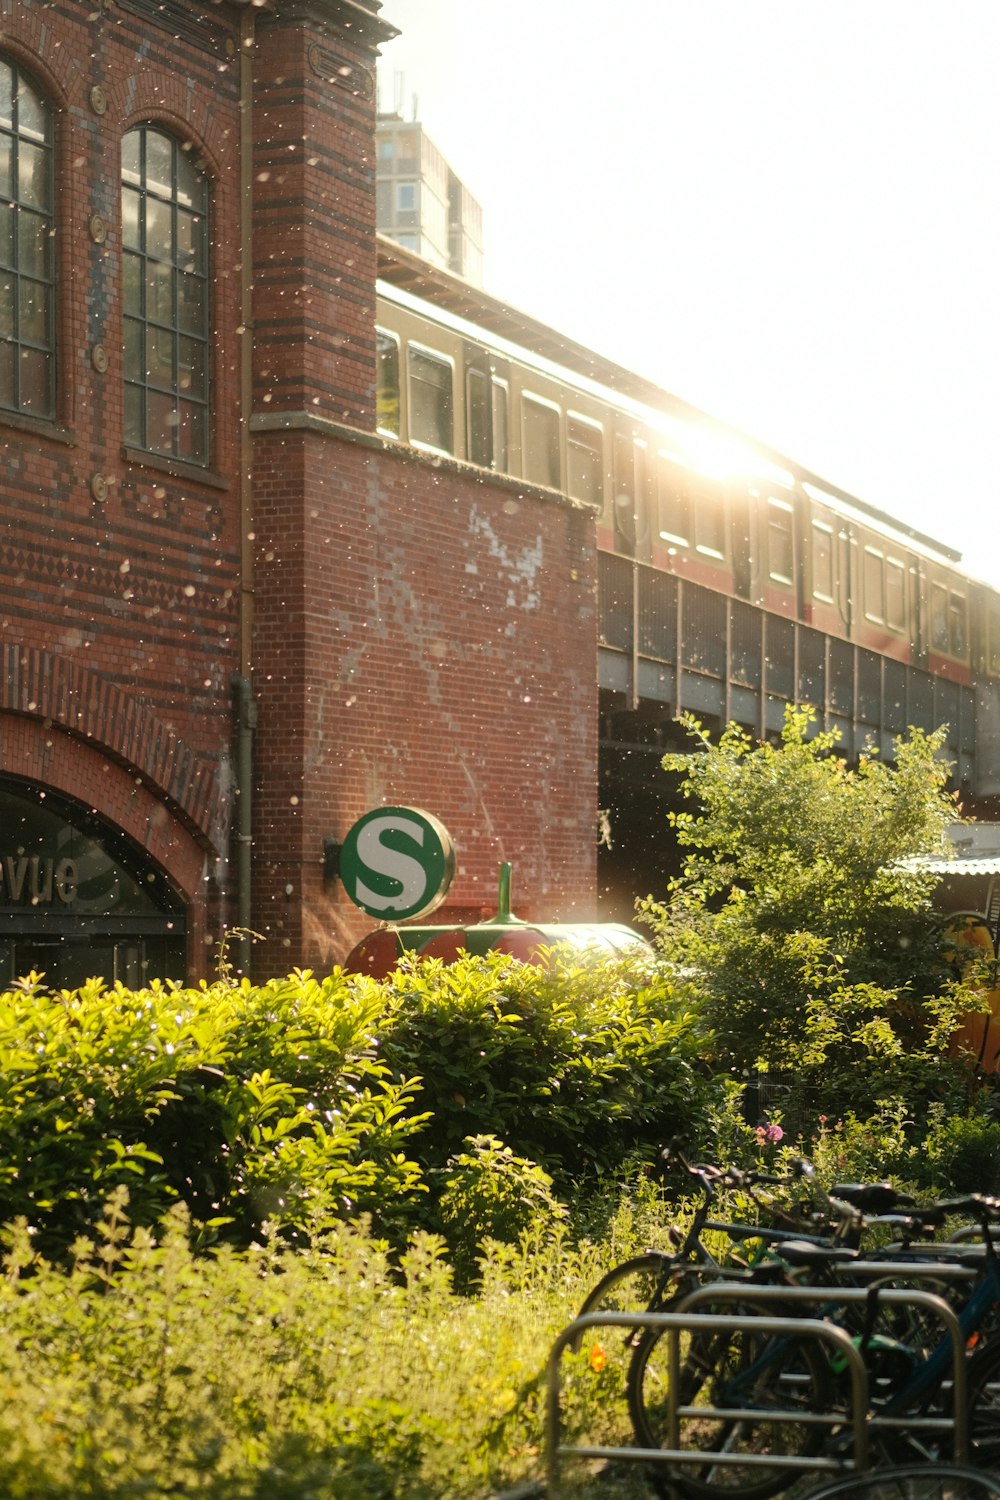 a train is passing by a brick building